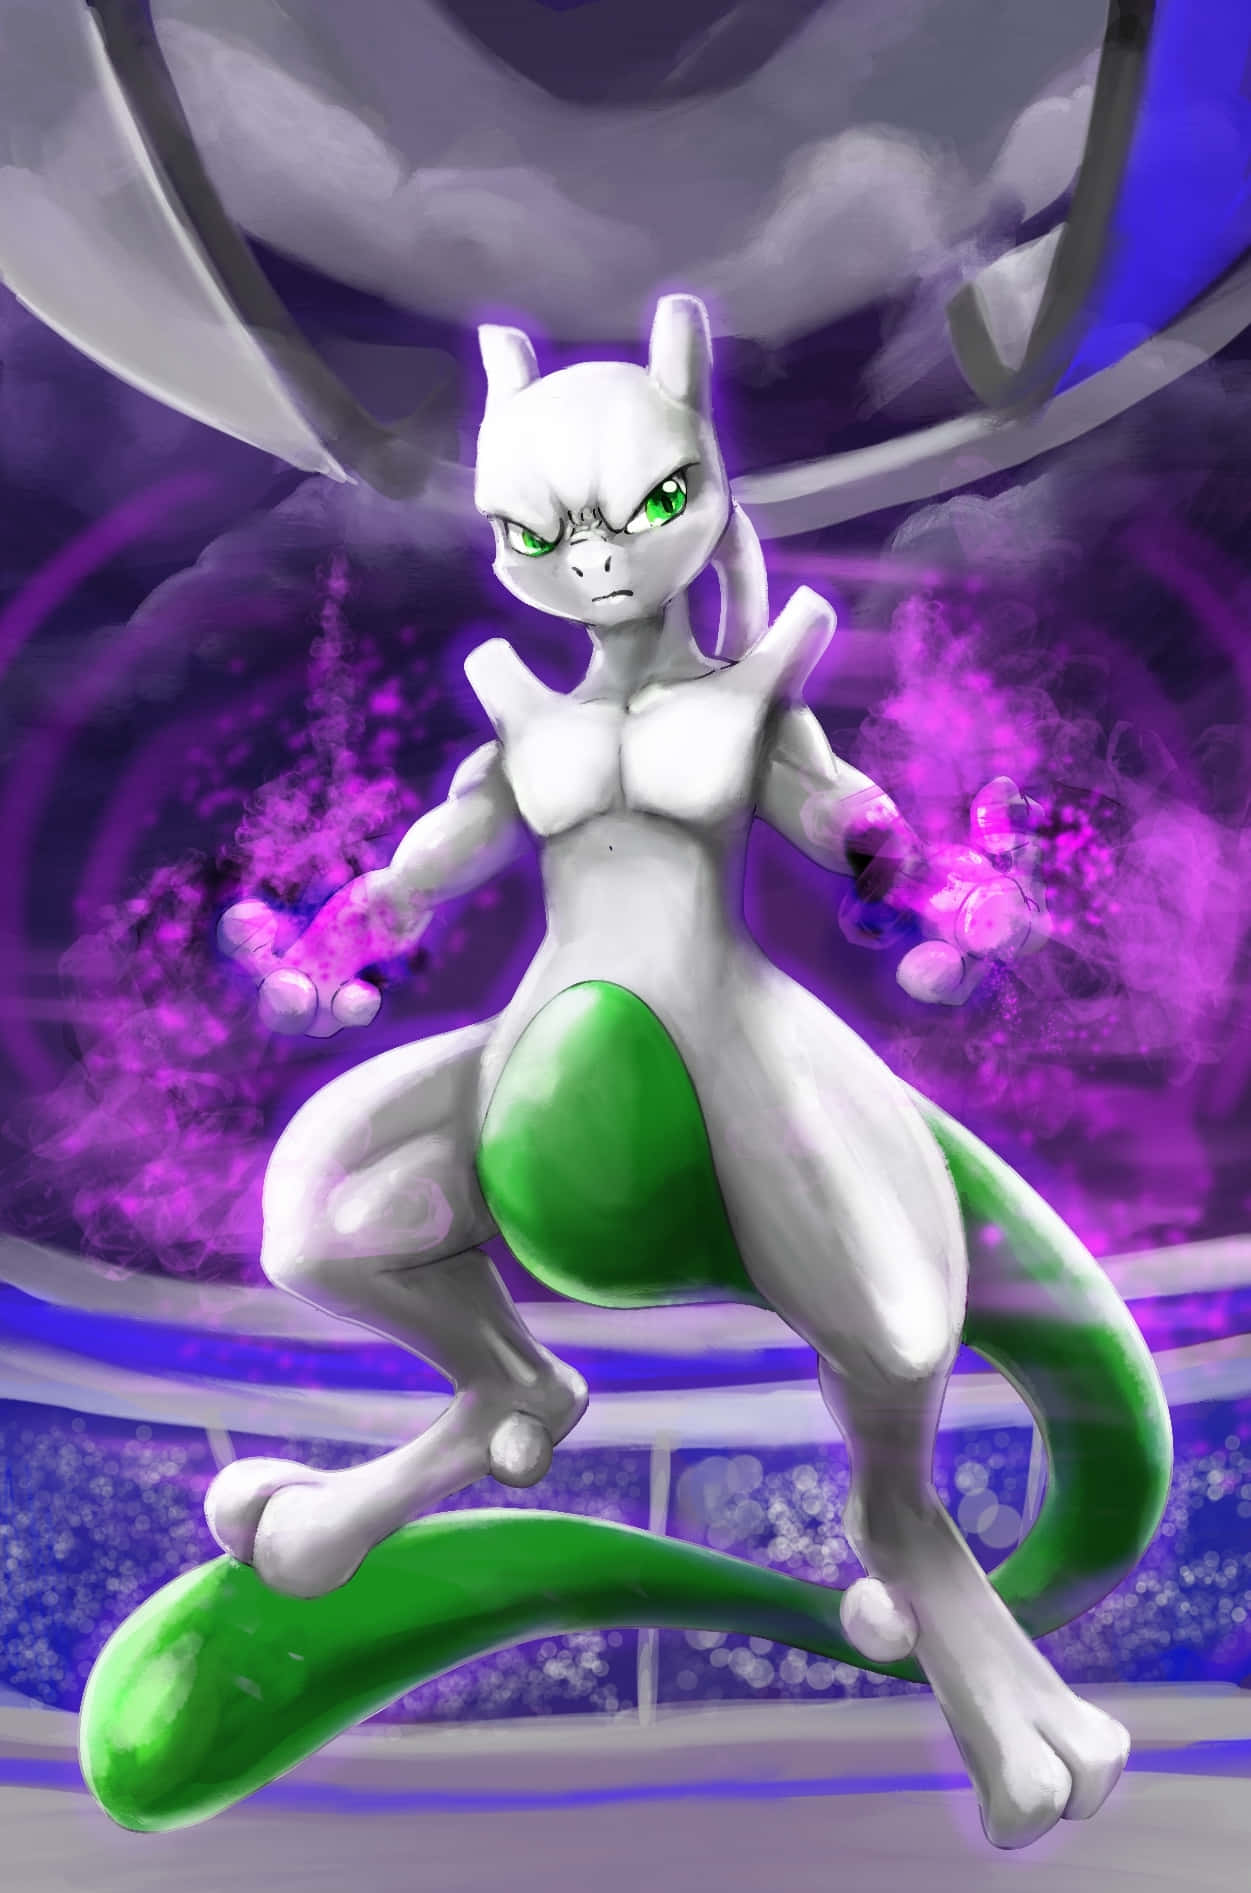 "Feel the unfathomable power of Mewtwo"